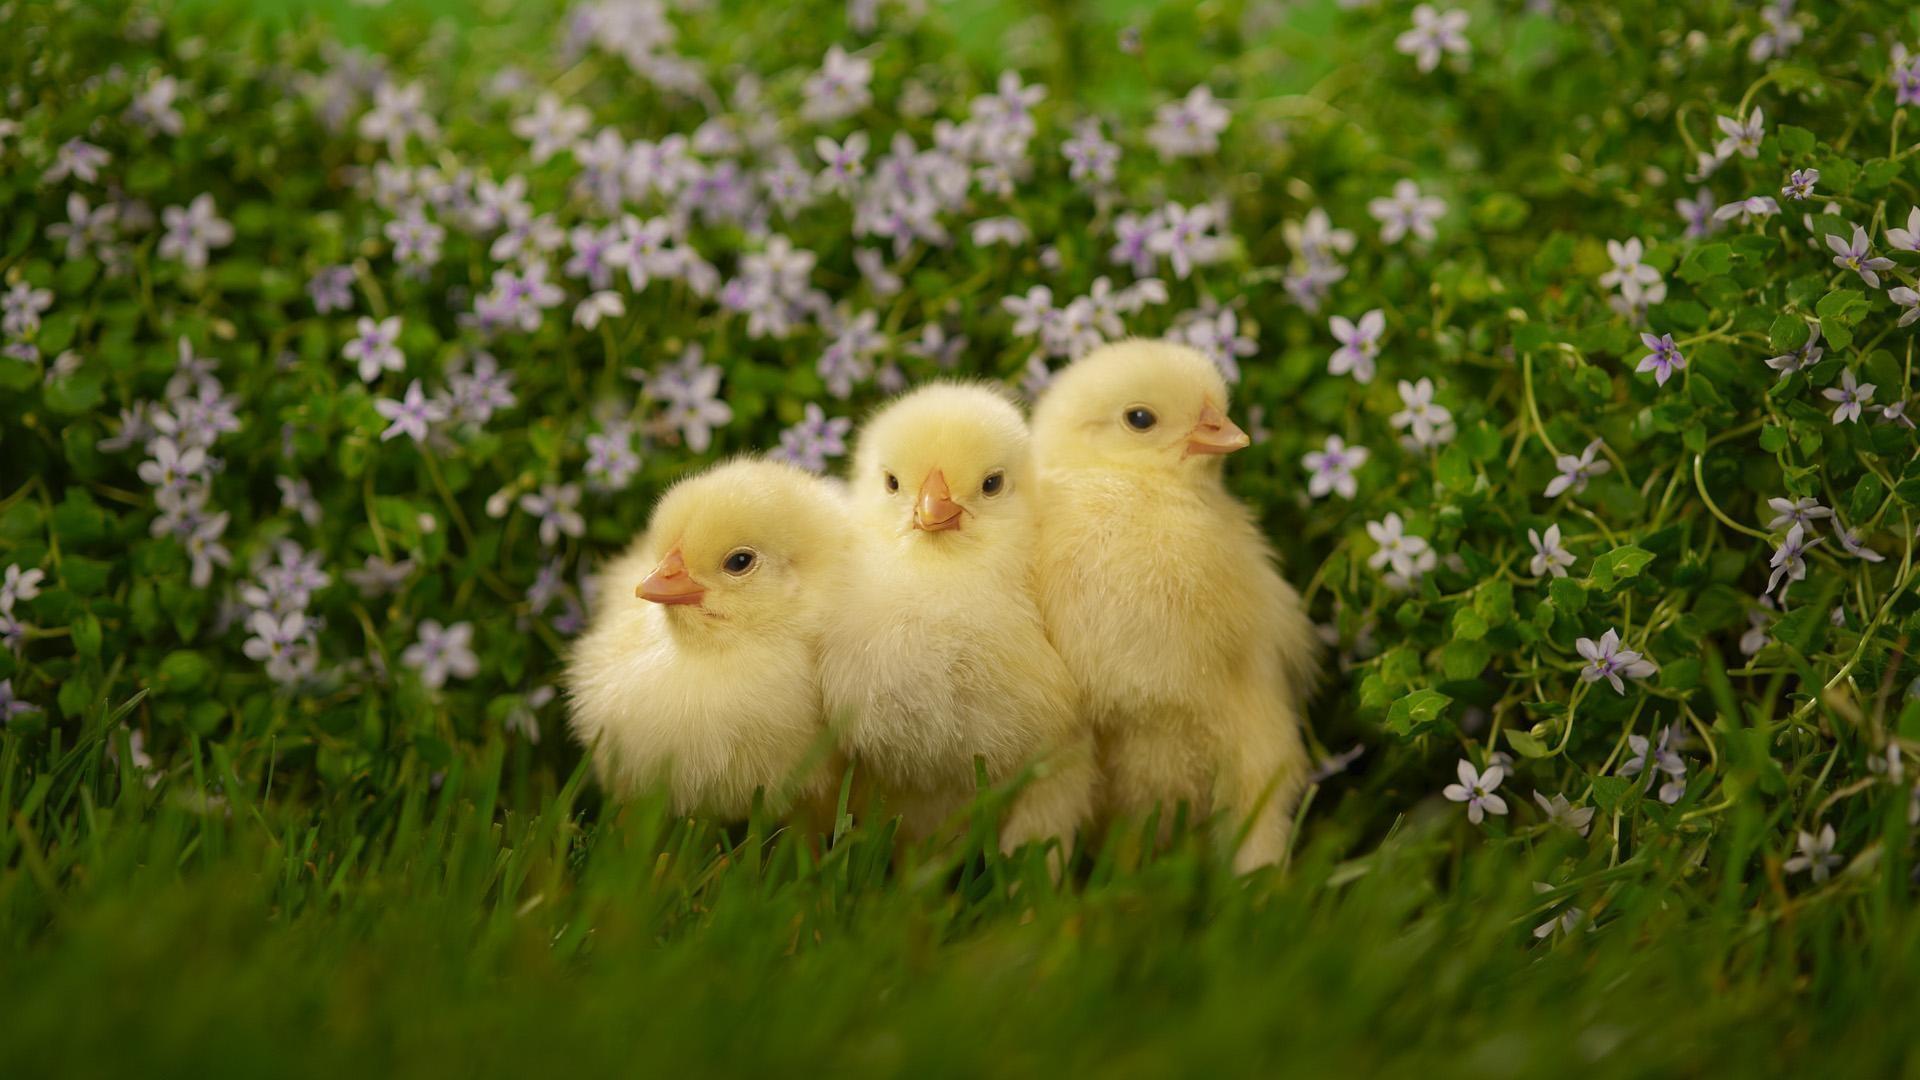 Chick Hd Wallpapers For Pc, Chick, Animal